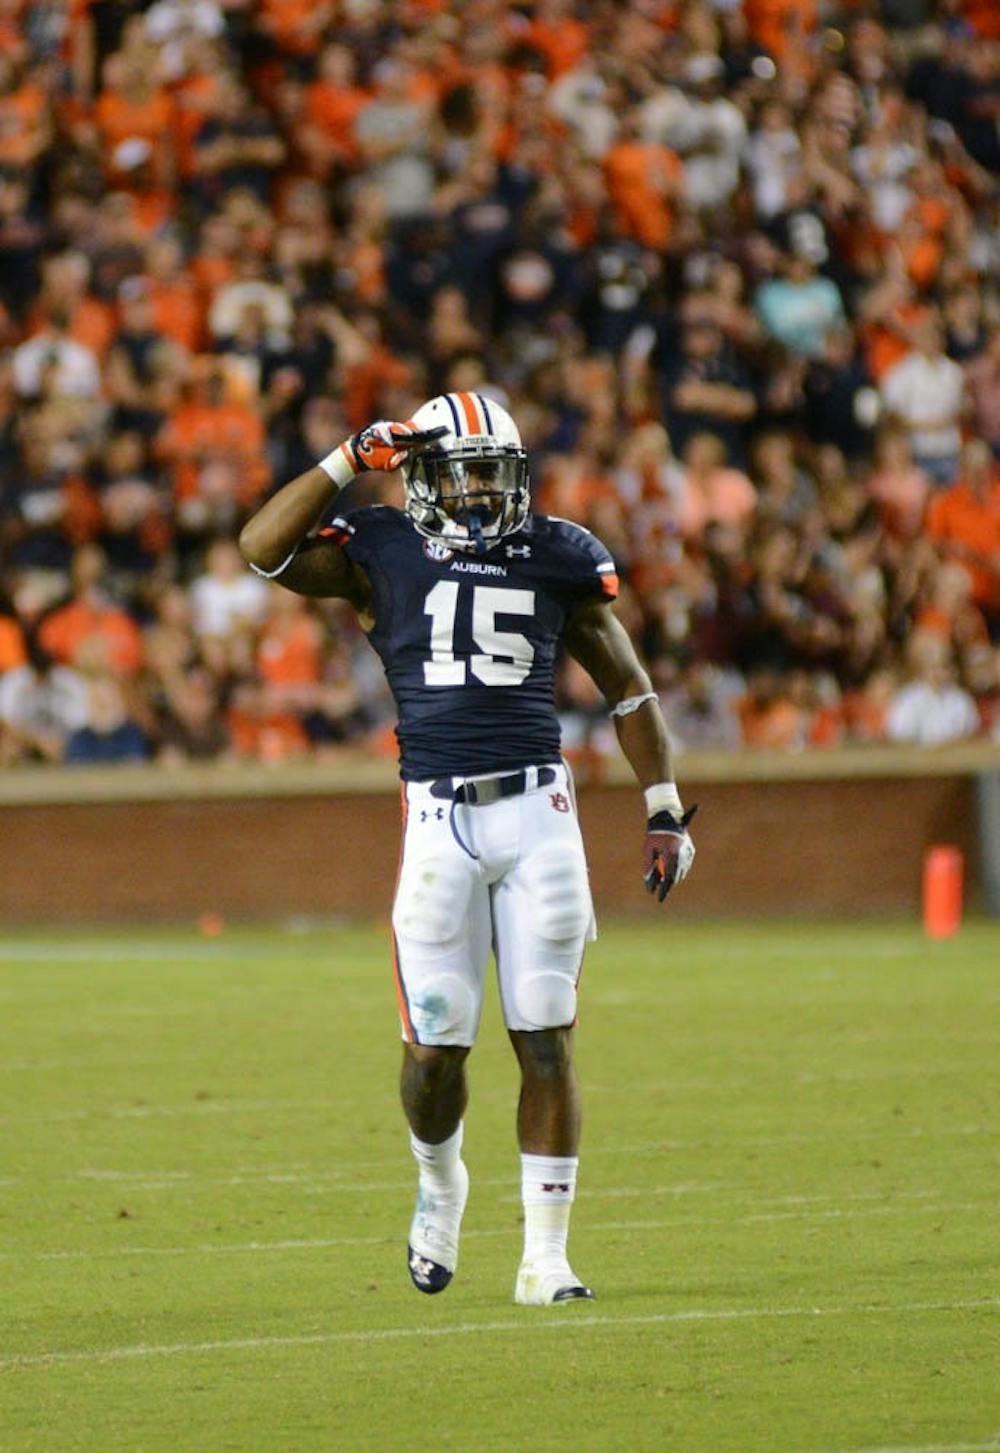 <p>After completing a sack, Joshua Holsey salutes the crowd.  (Daniel Oramas / MULTIMEDIA EDITOR)</p>